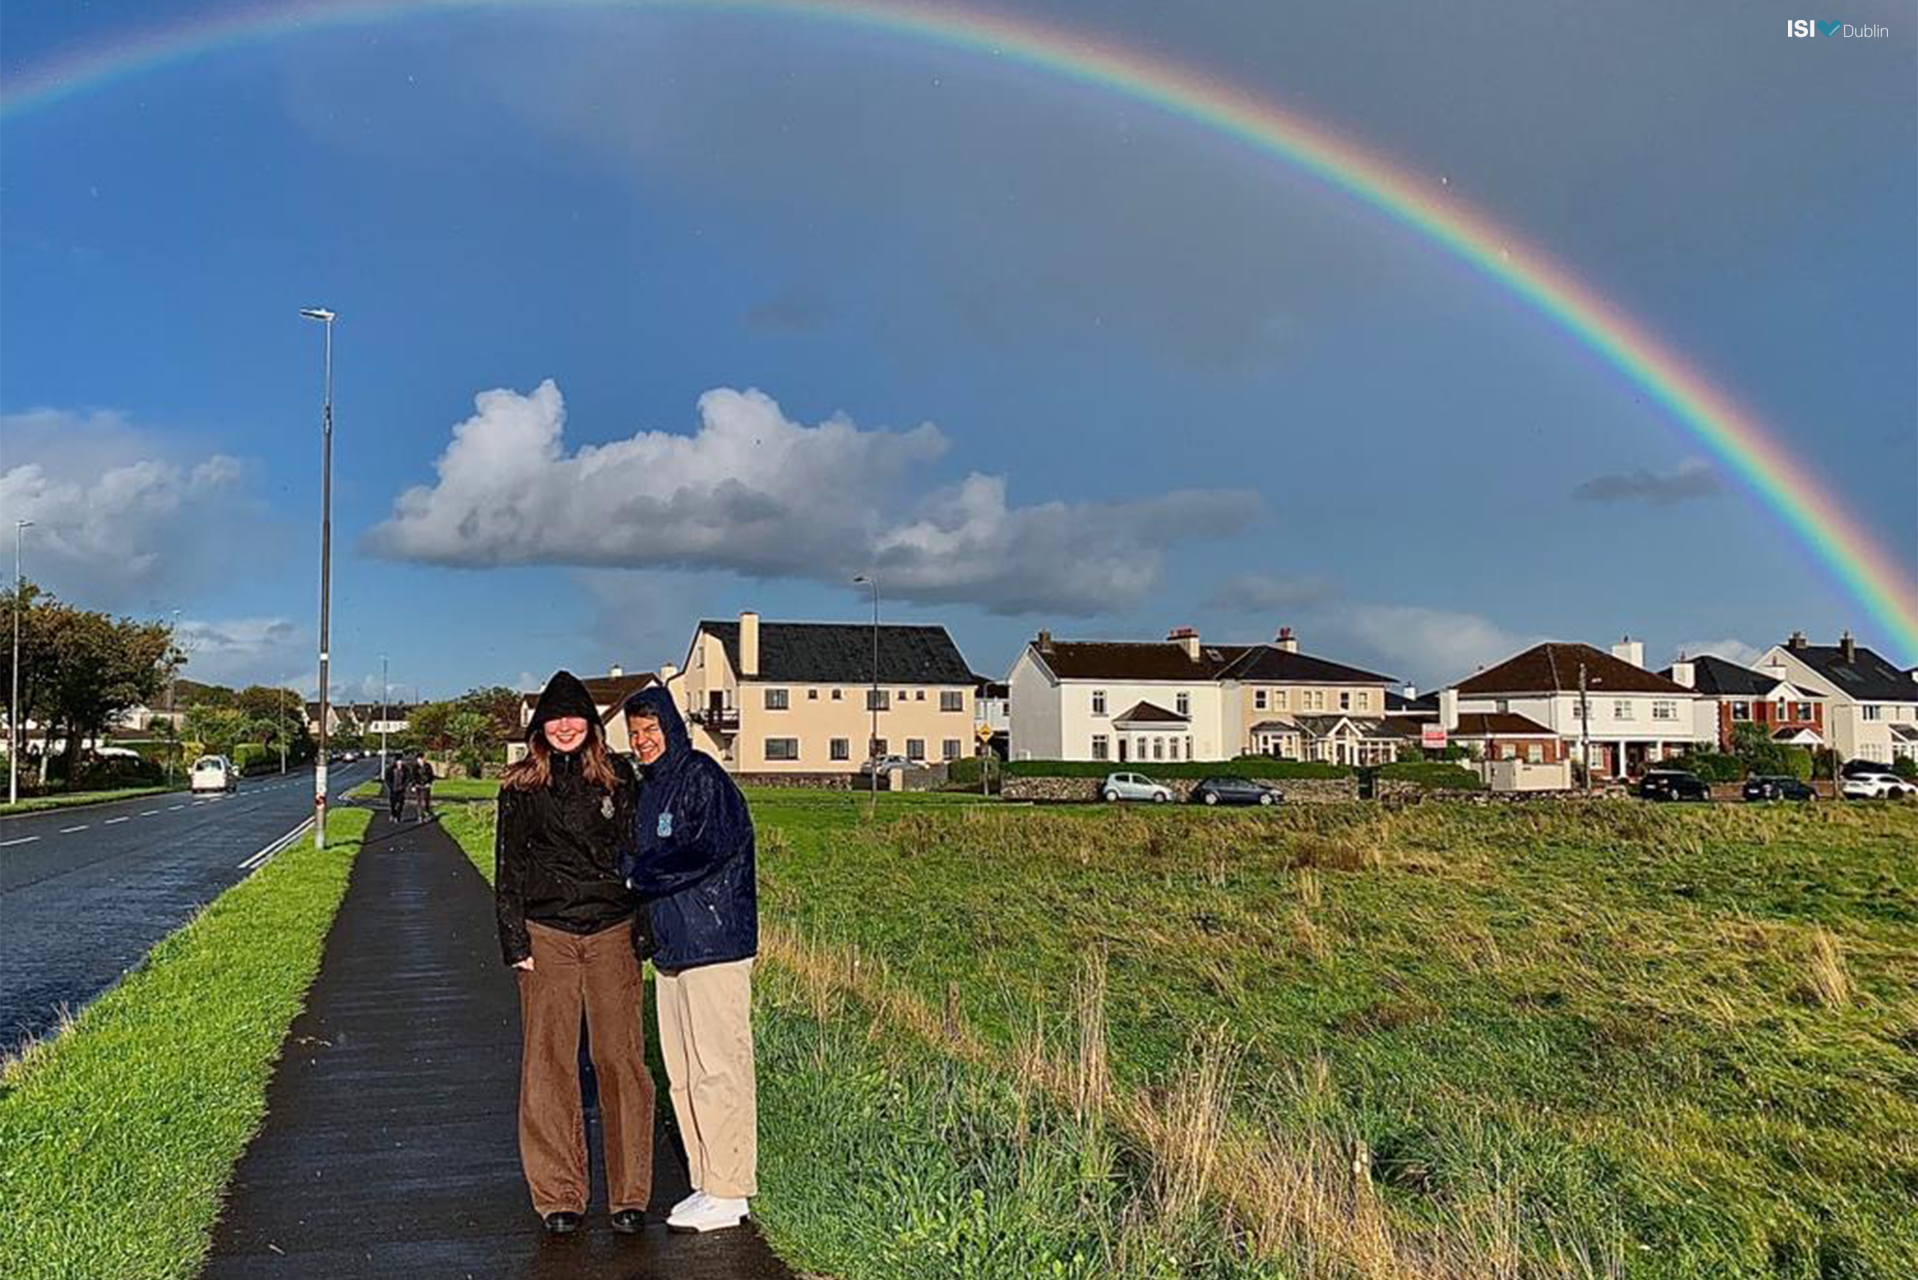 Yara Linne (4th year at St. Finian’s) and Elisabeth Heye (4th year at Malahide CS) went on a trip to Galway with Yara’s host family. They got caught in the rain but managed to get this great photo with the rainbow behind them!